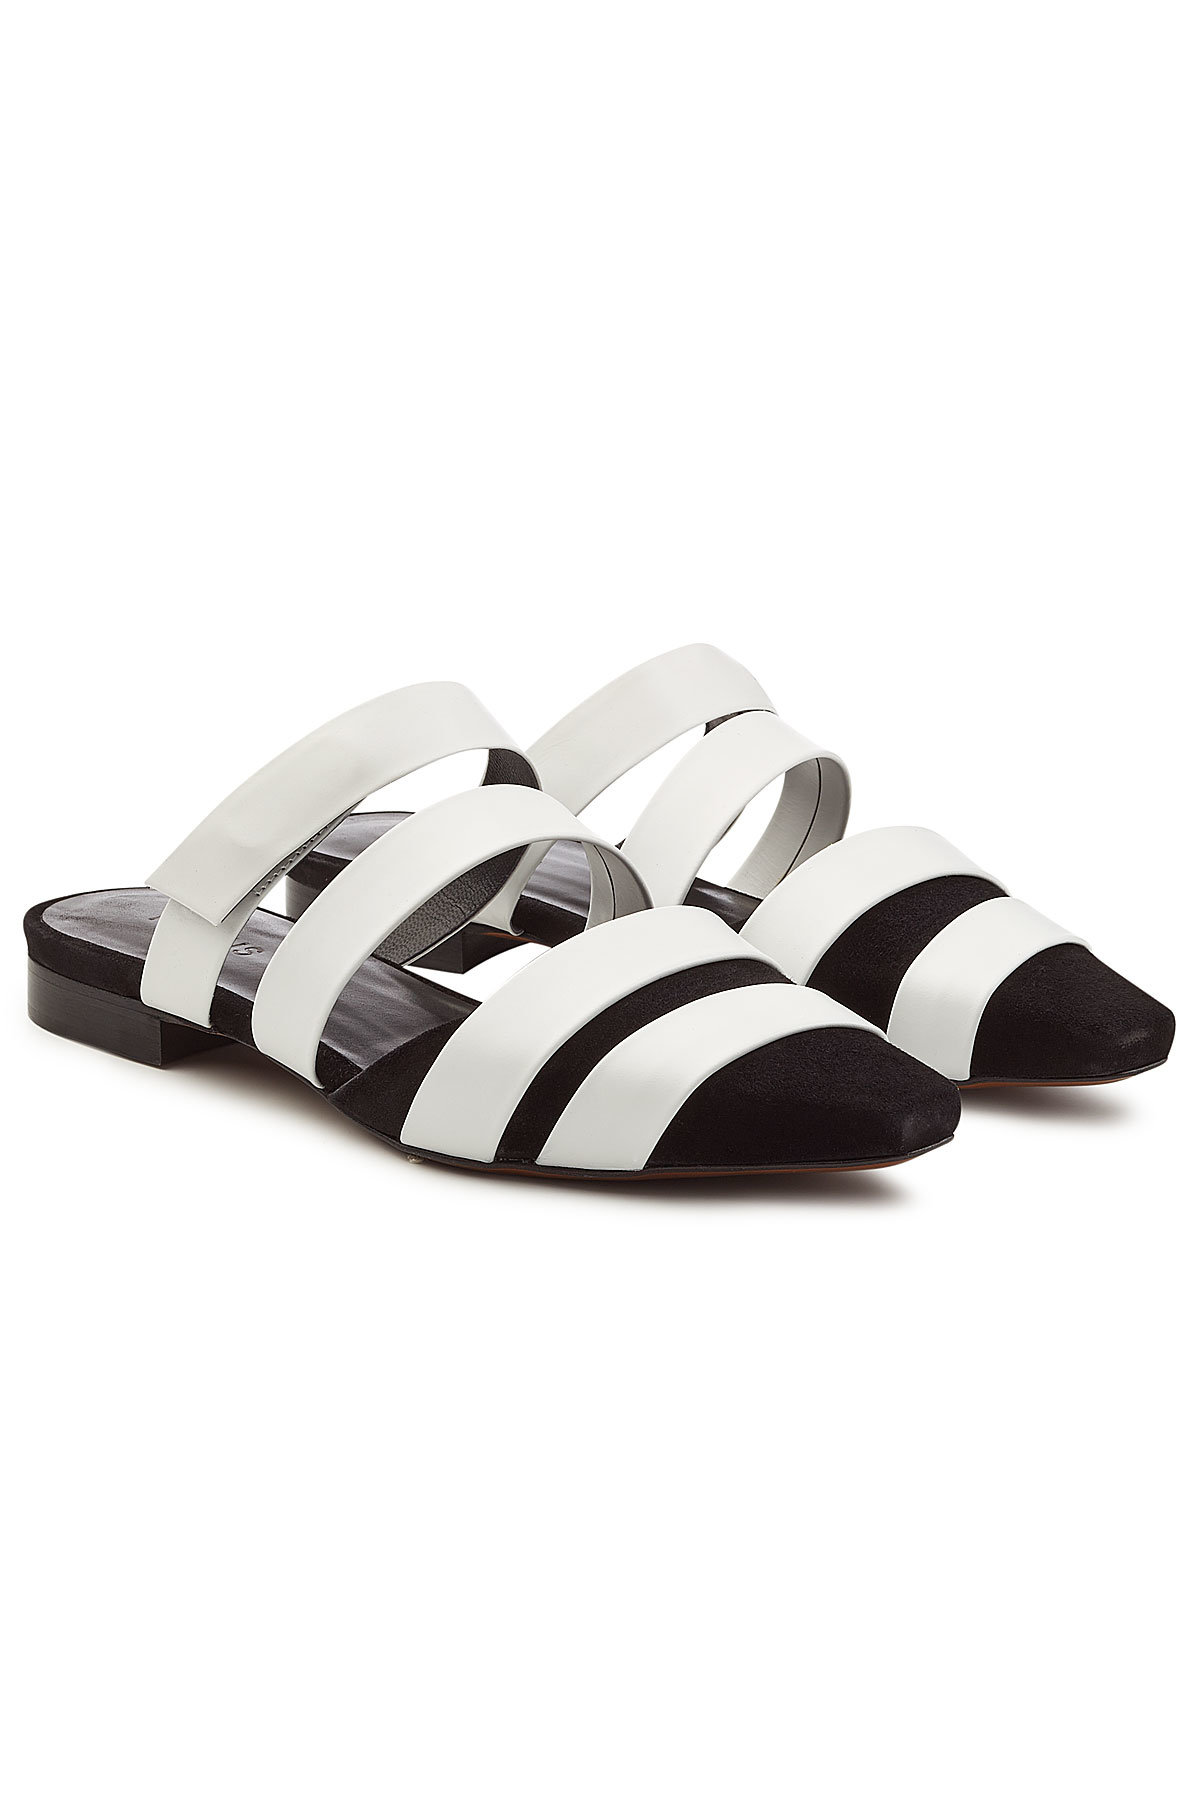 Neous - Gomesa Slip-On Sandals in Leather and Suede